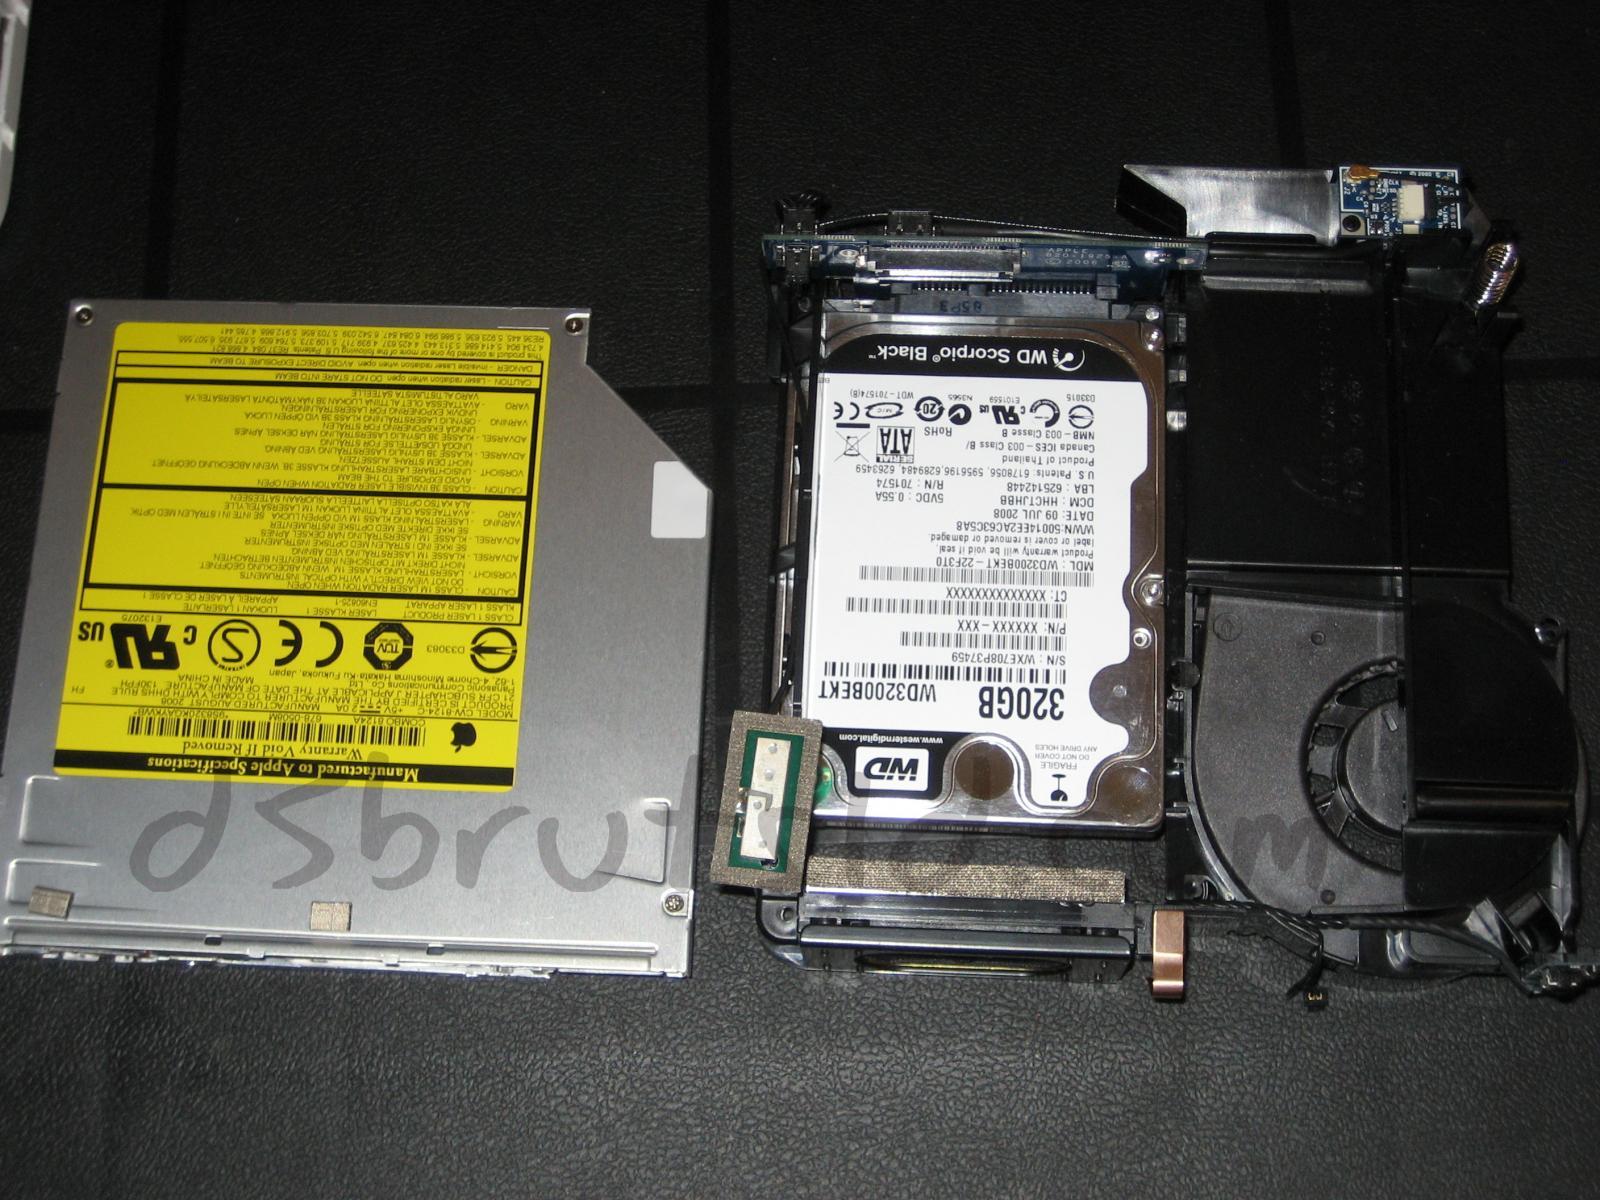 Optical Disk Drive Removed